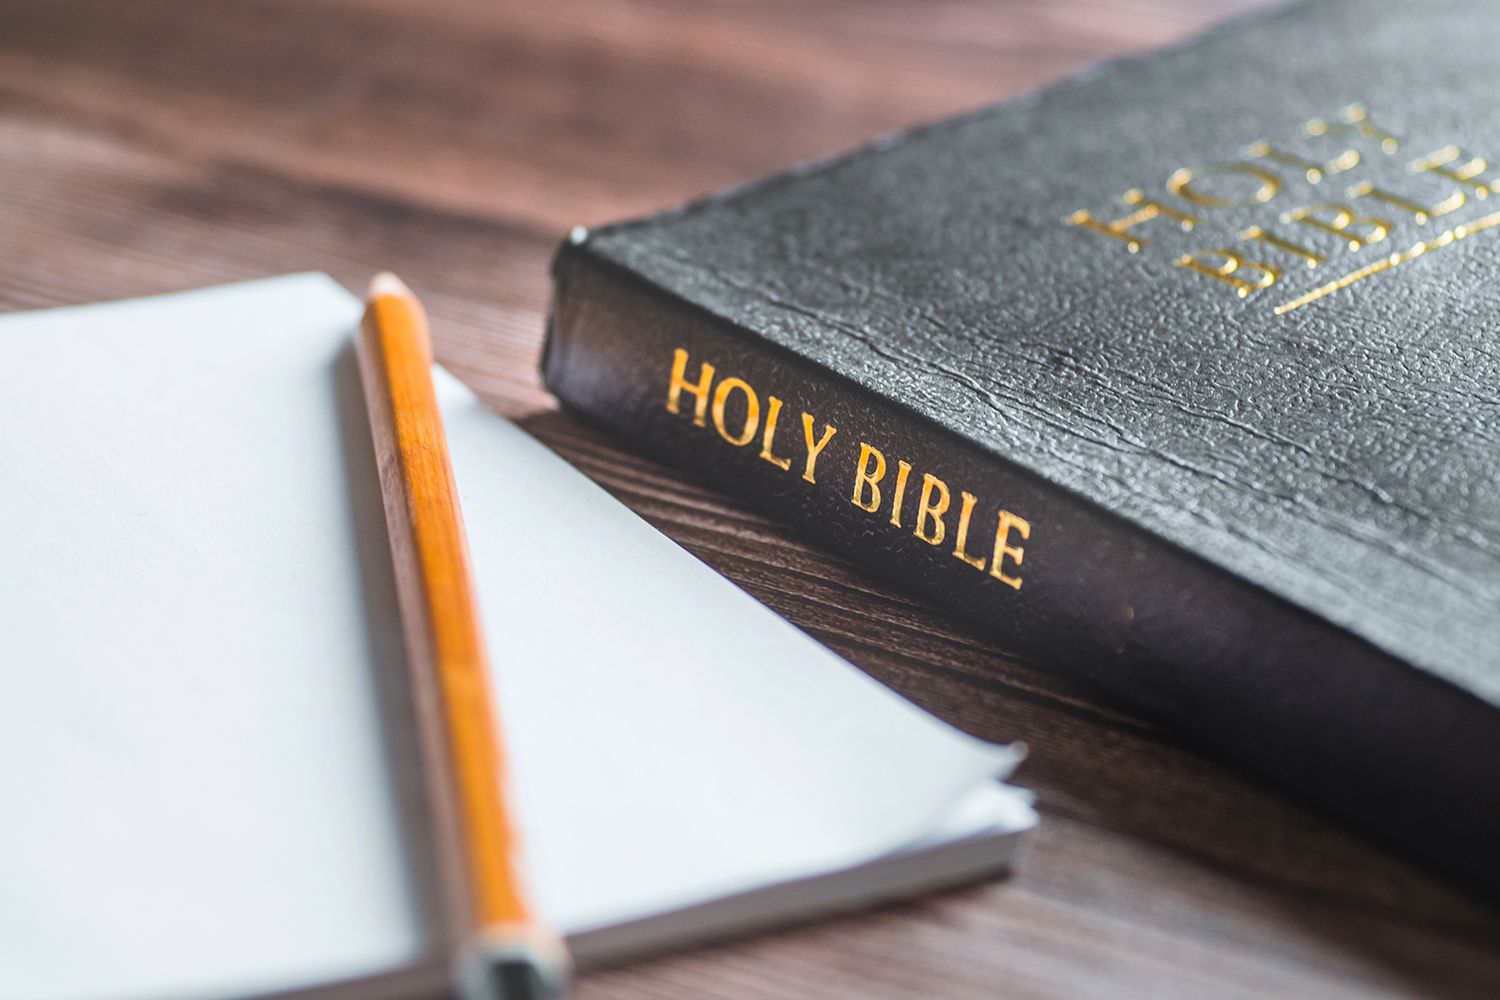 Oklahoma Schools Are Now Required to Teach the Bible and Ten Commandments